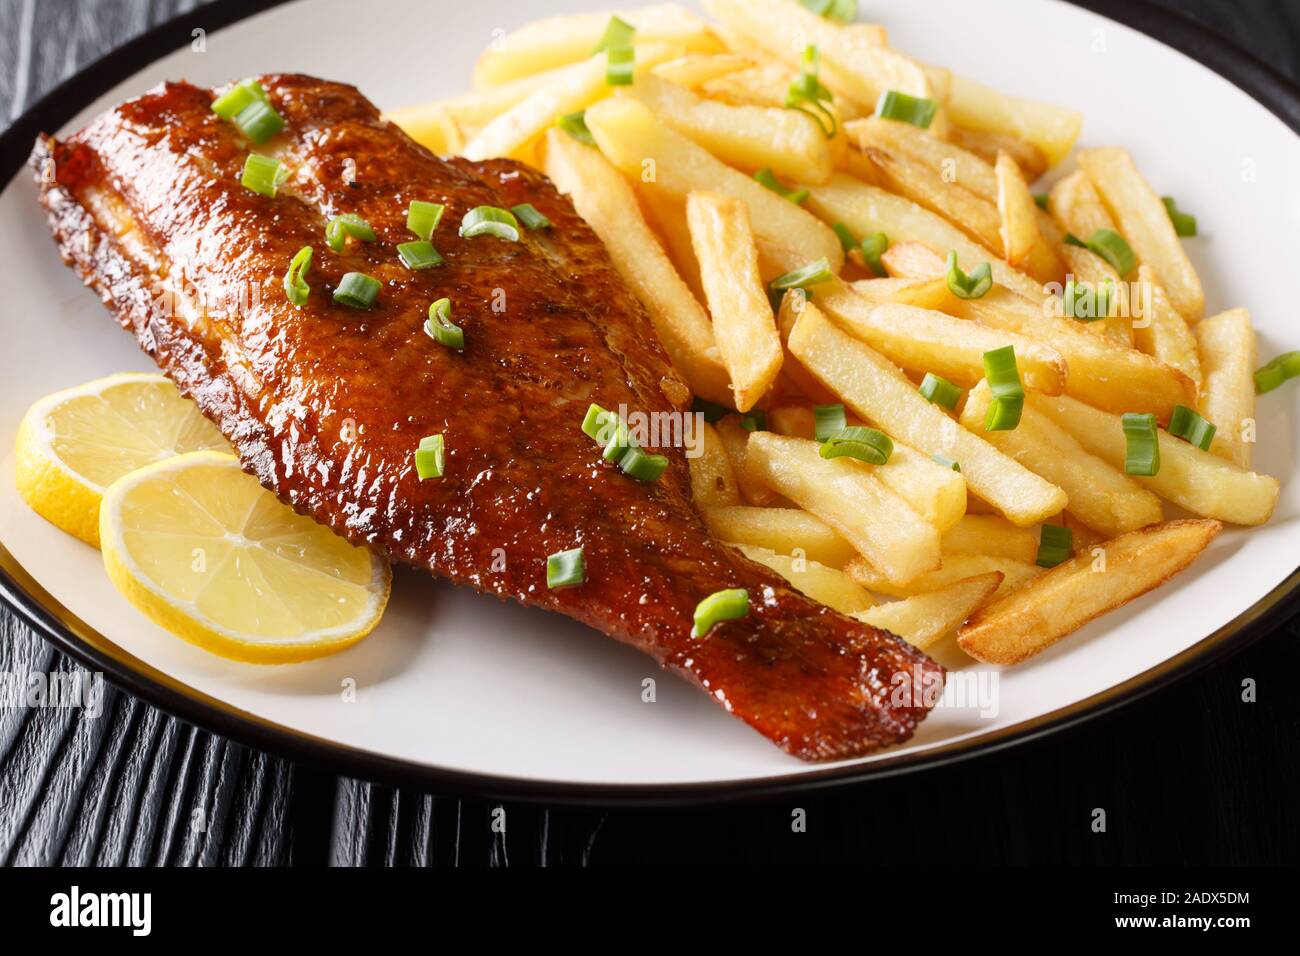 Fried Sebastes served with French fries close-up in a plate on the table. horizontal Stock Photo